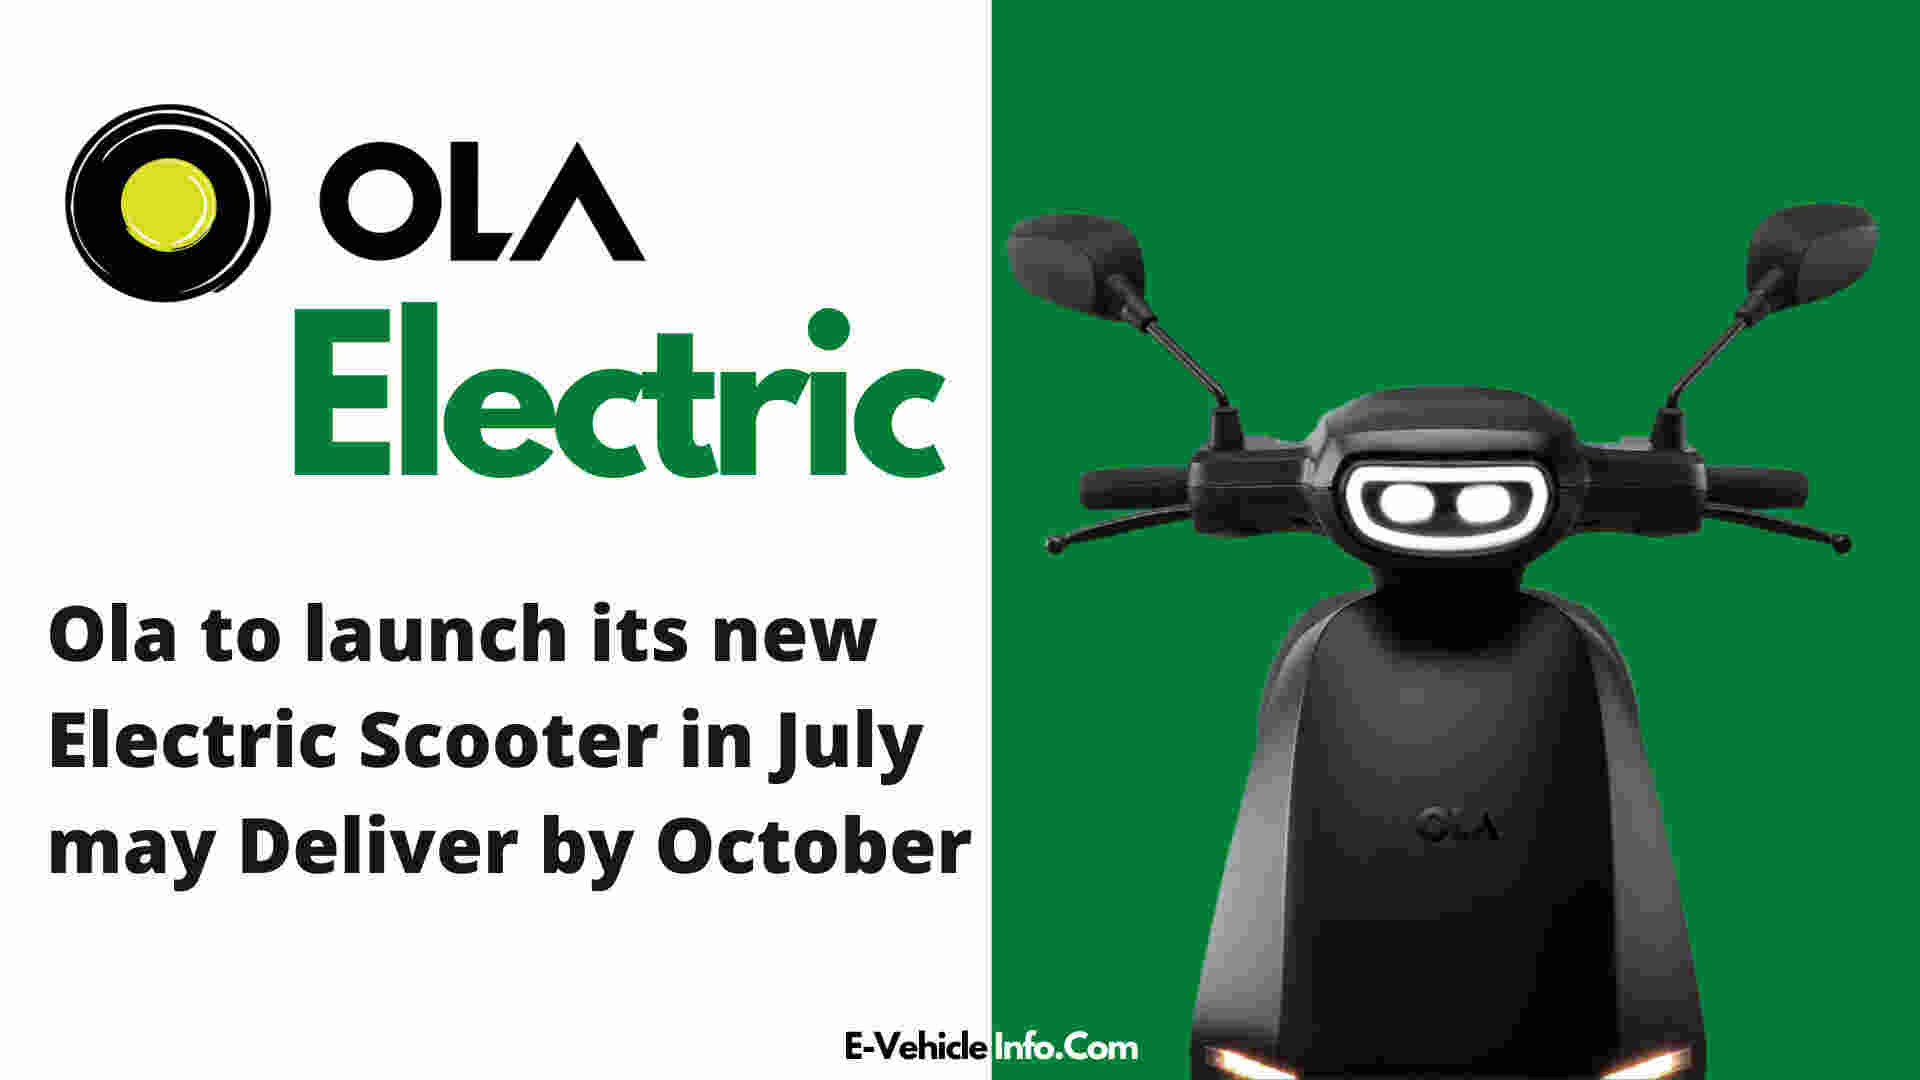 https://e-vehicleinfo.com/ola-to-launch-its-new-electric-scooter-in-july/